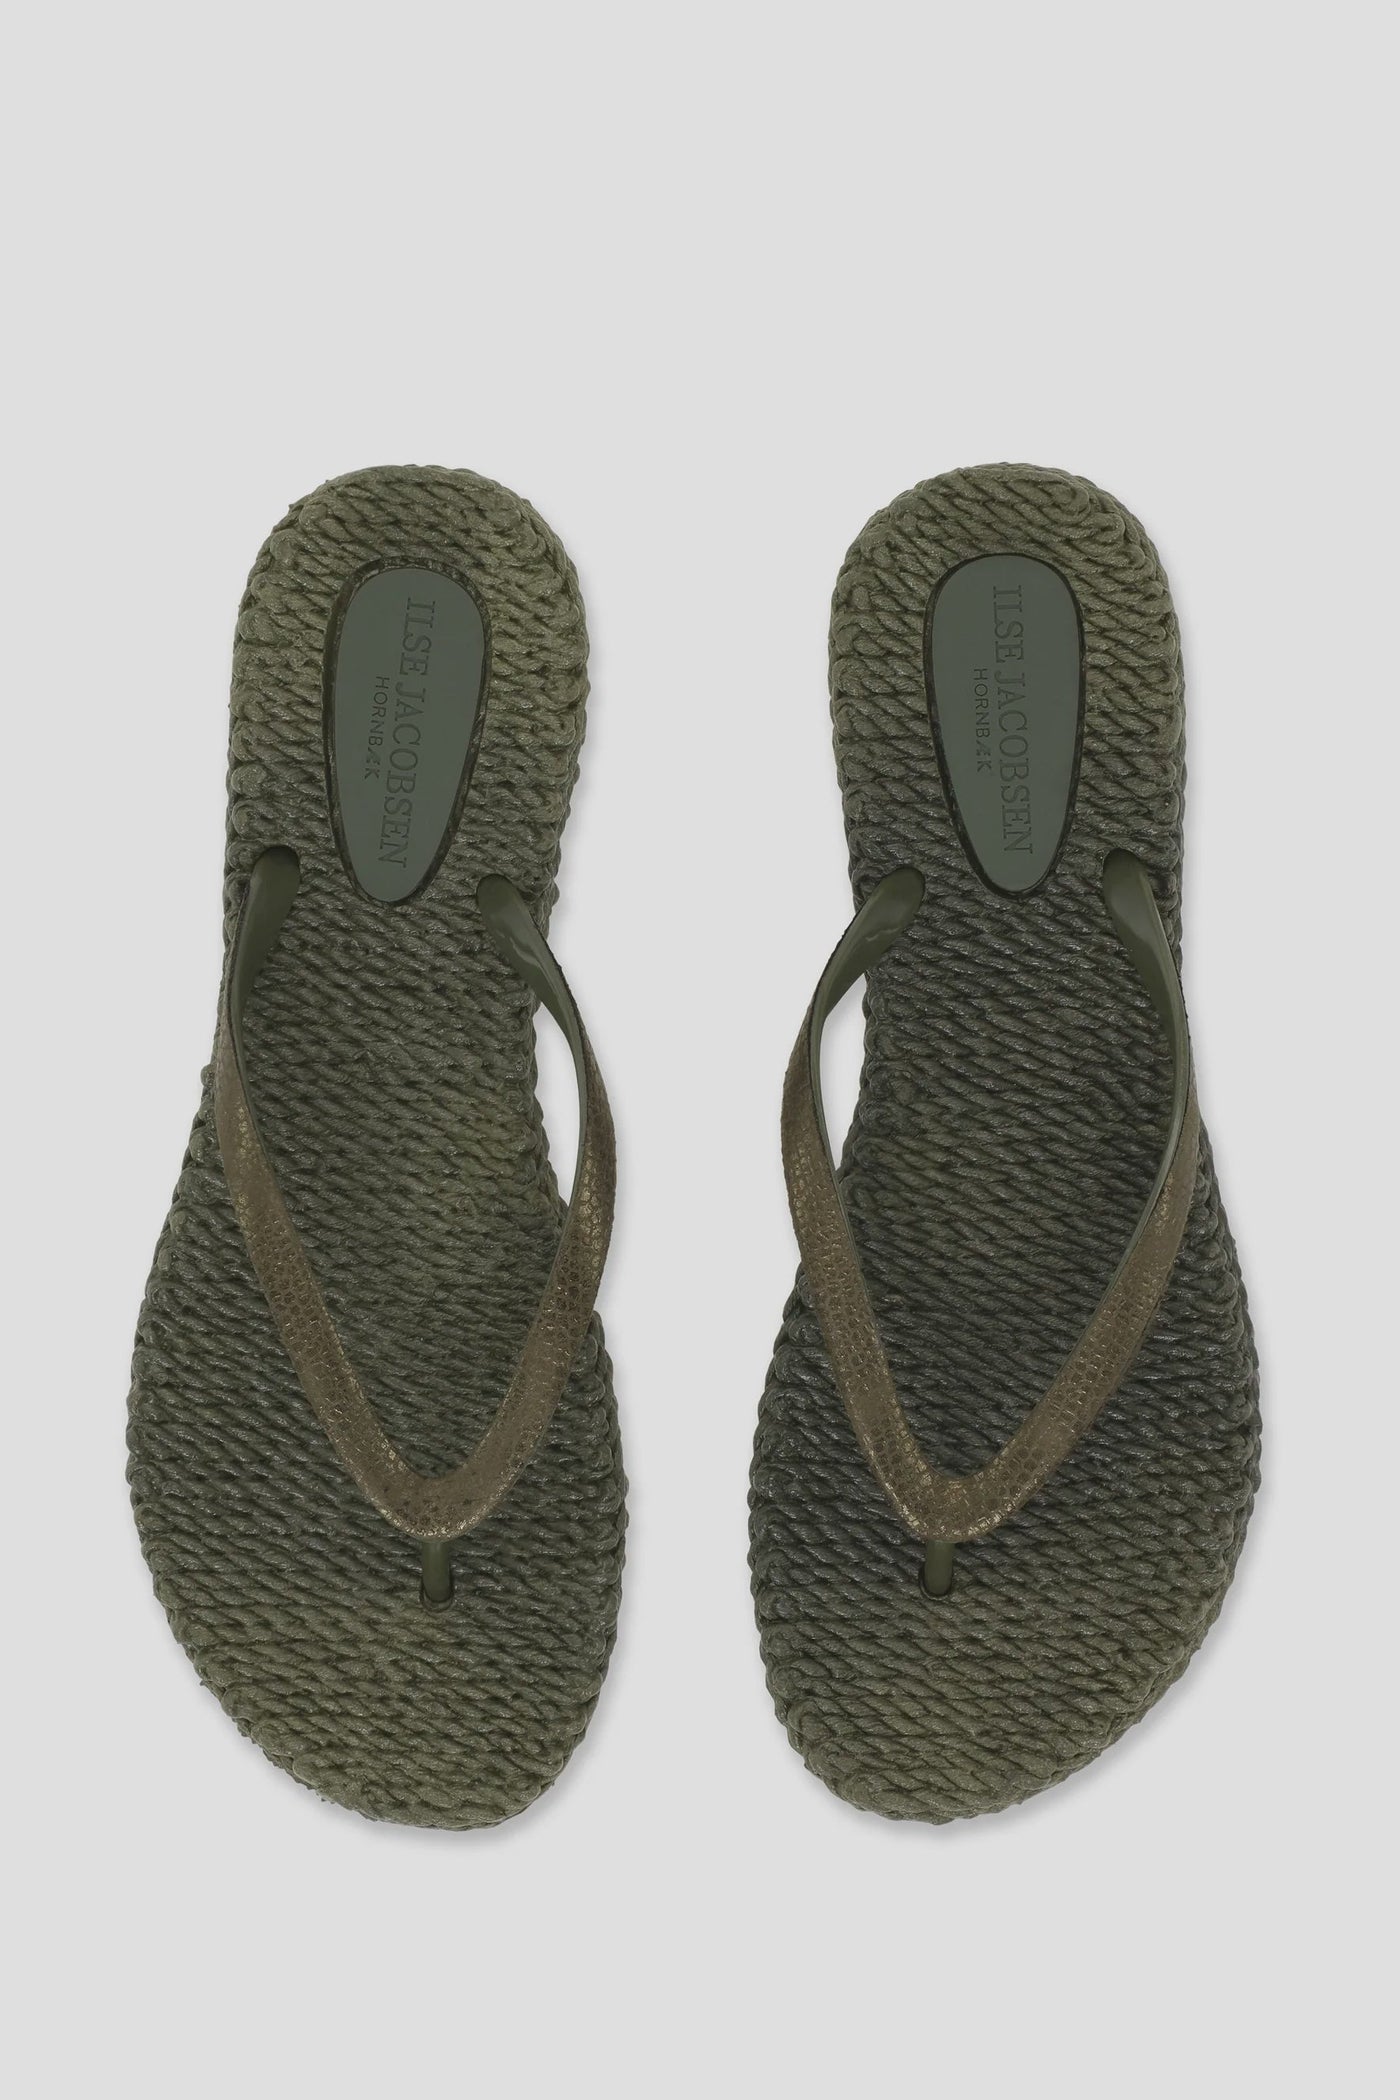 Ilse Jacobsen Army Cheerful Flip Flops with Glitter-Accessories-Ohh! By Gum - Shop Sustainable